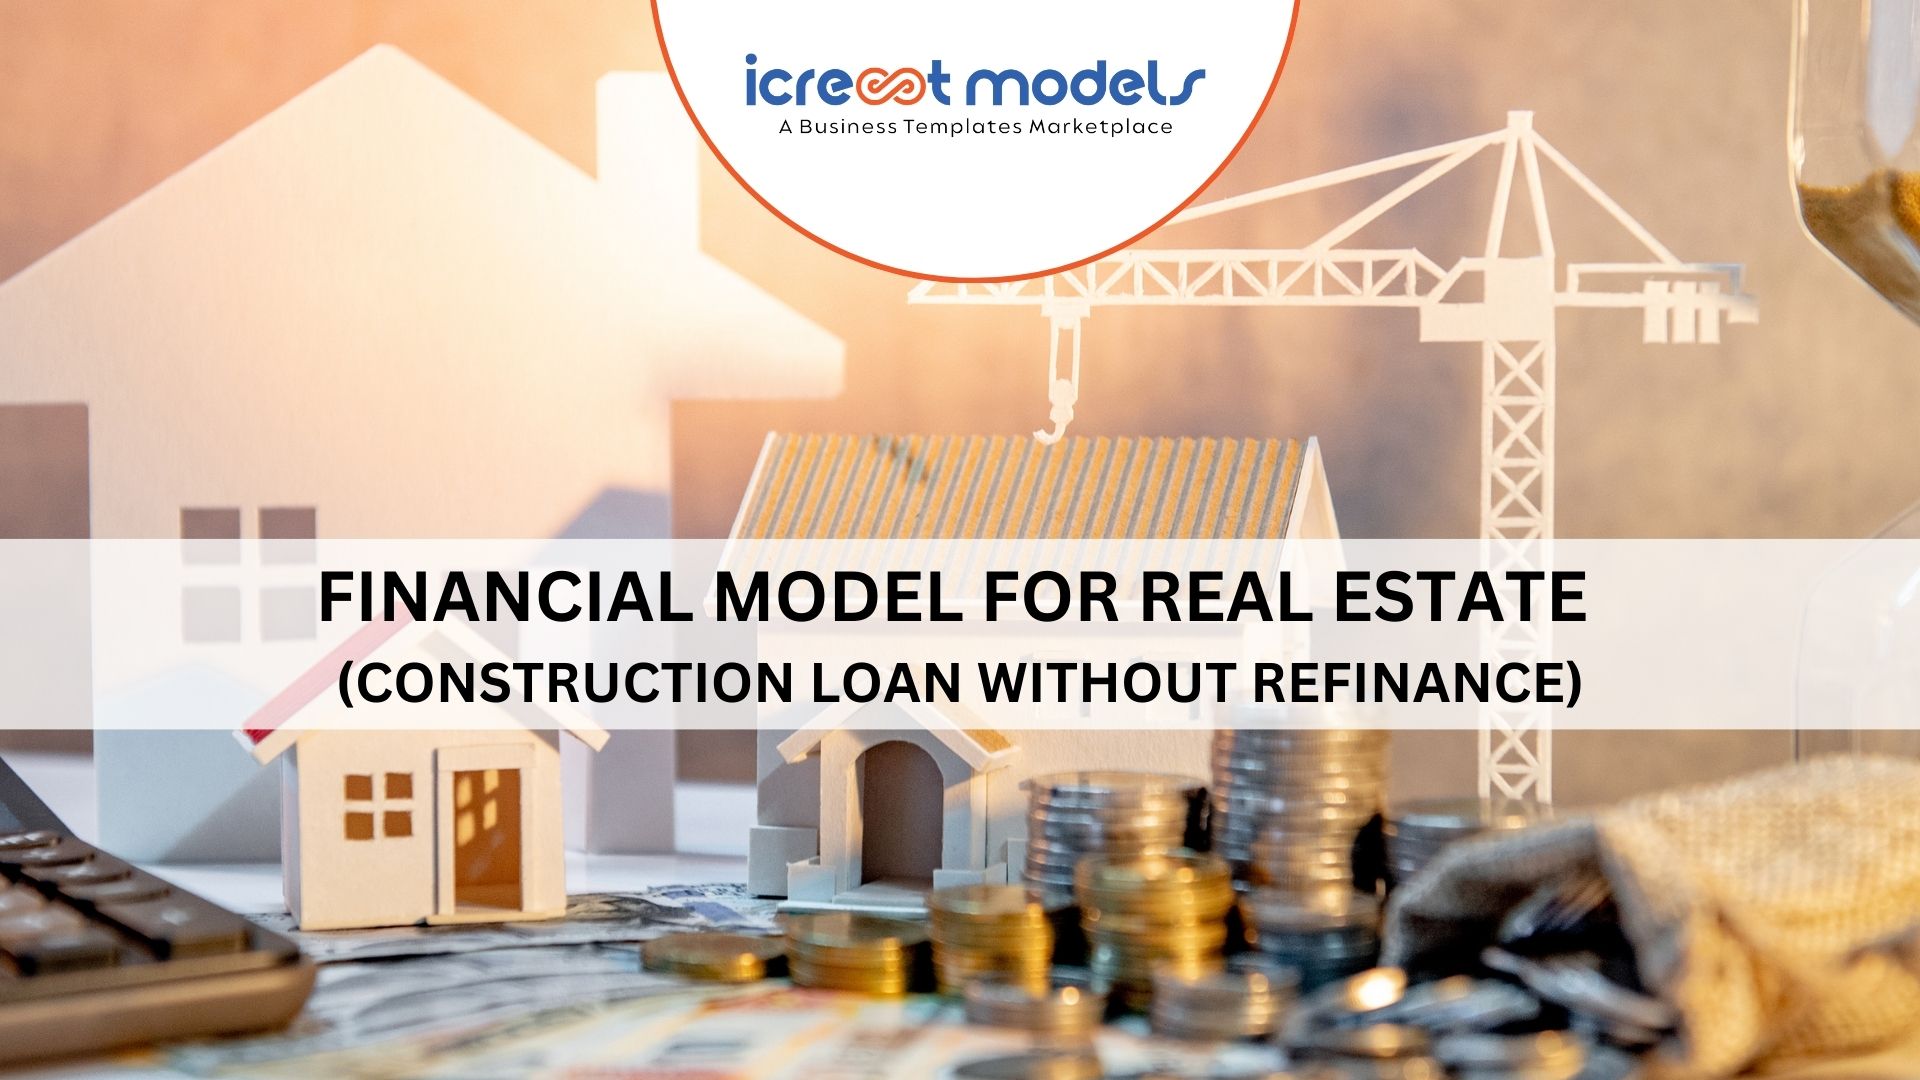 Financial Model For Real Estate (Construction Loan Without Refinance)